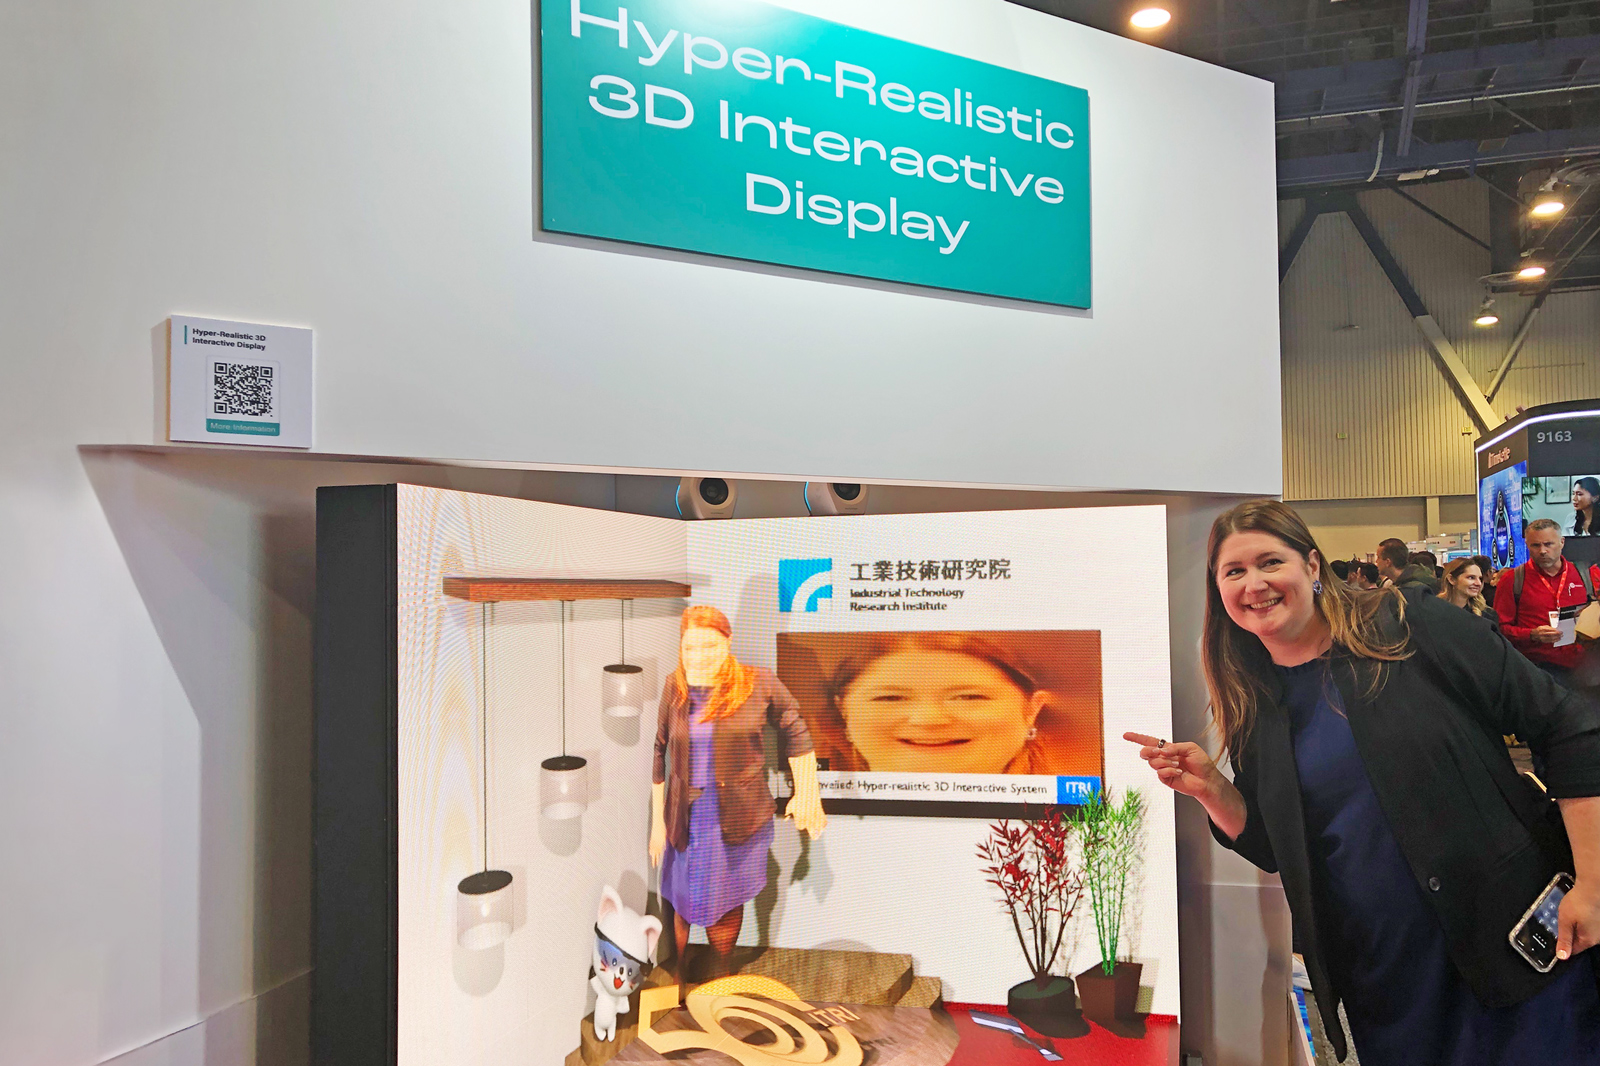 Jessica Boothe, Director of Market Research at CTA, engages with ITRI’s Hyper-Realistic 3D Interactive Display, interacting with her digital avatar.